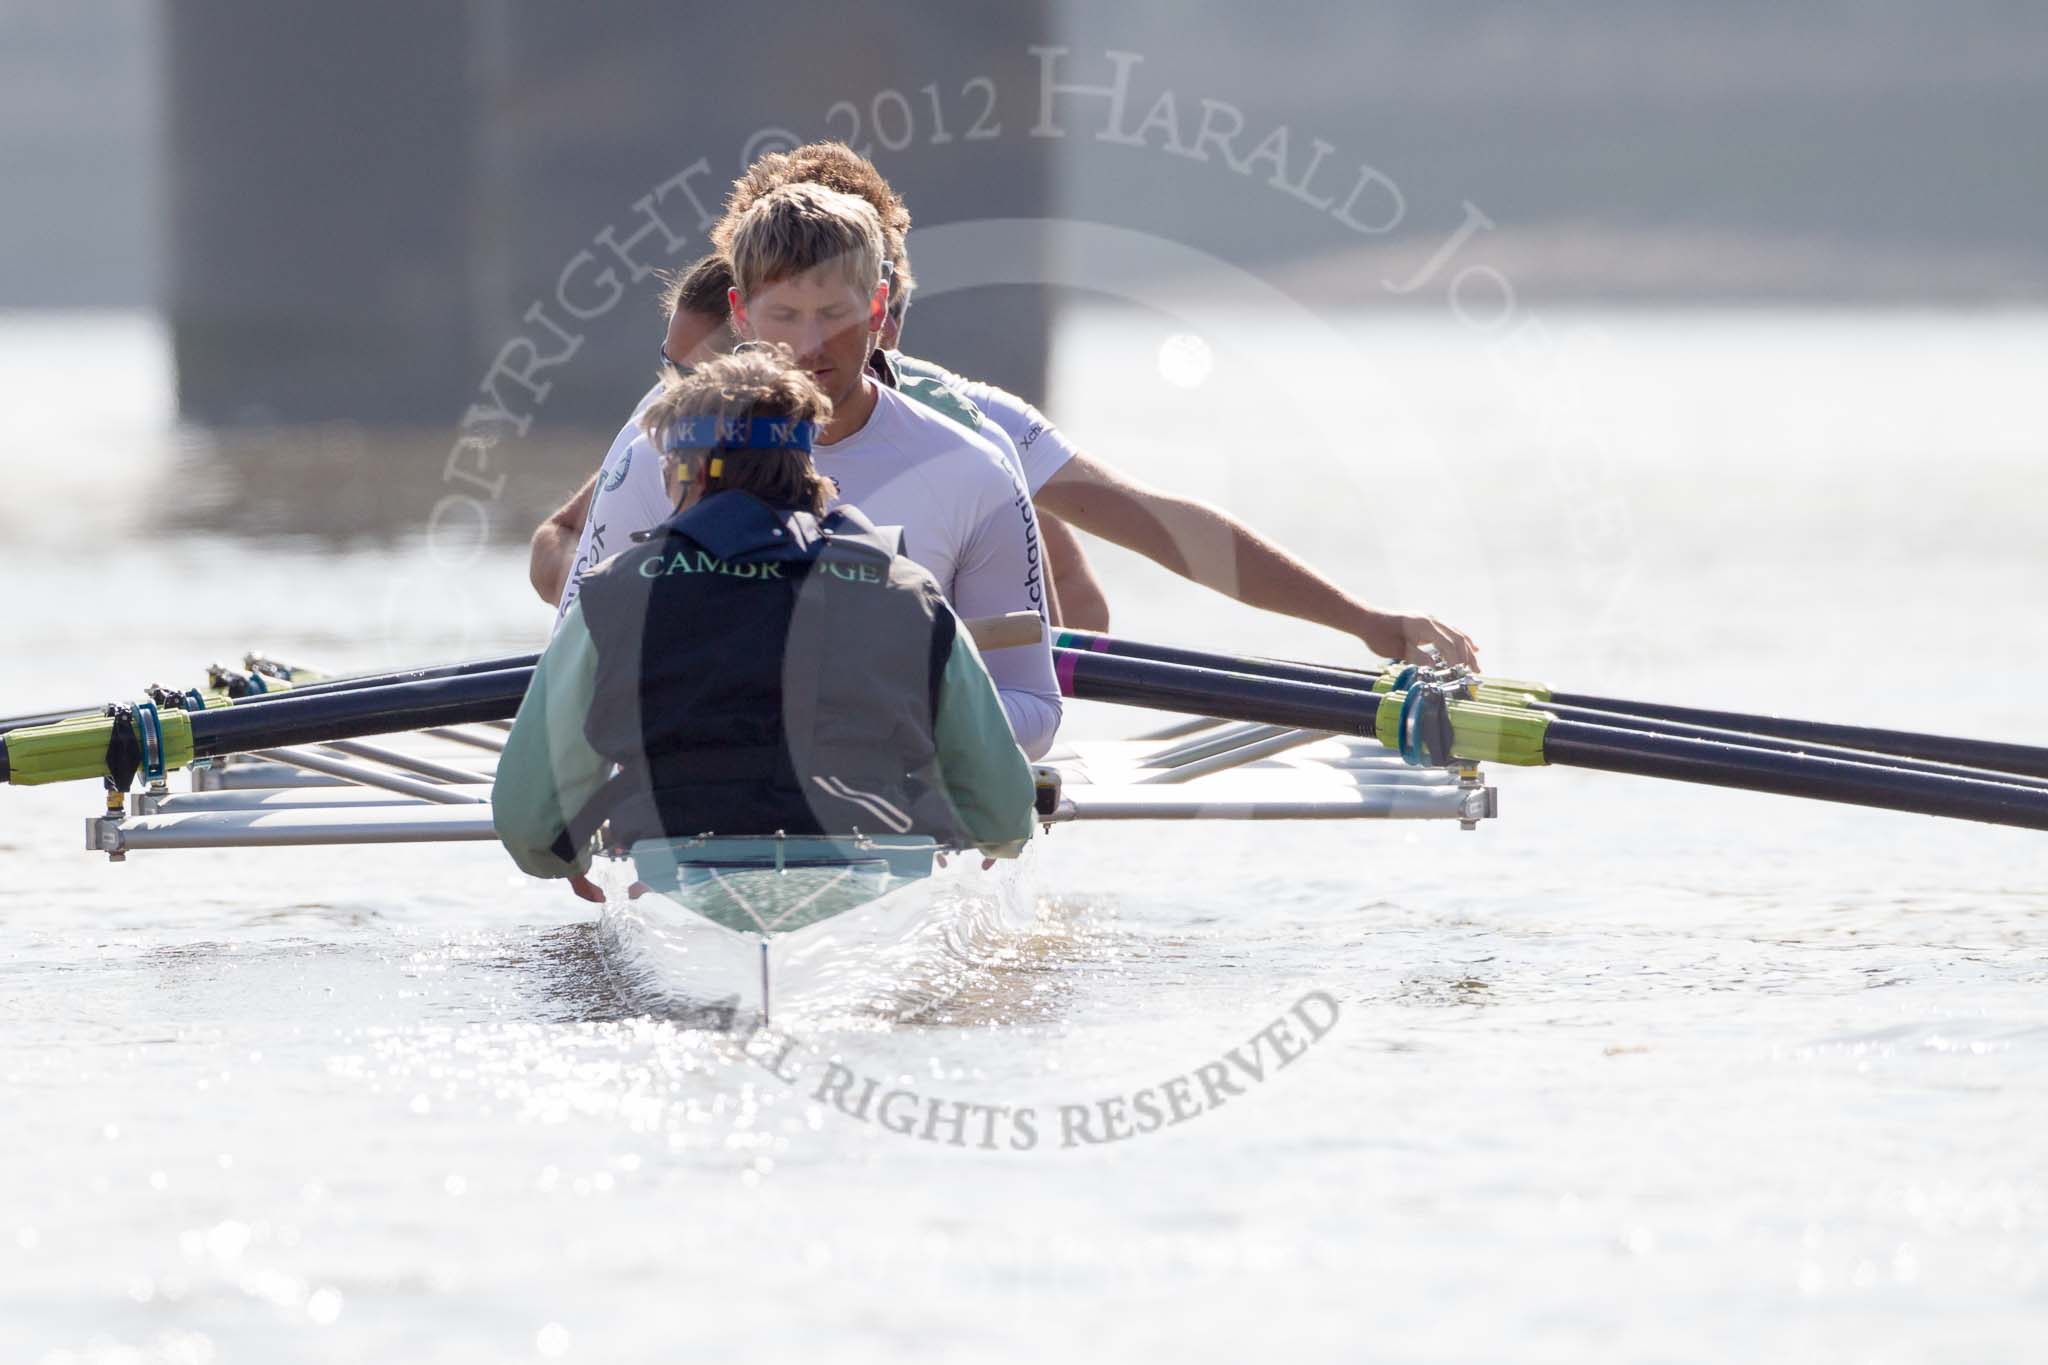 The Boat Race season 2012 - Tideway Week (Tuesday).




on 03 April 2012 at 10:33, image #43